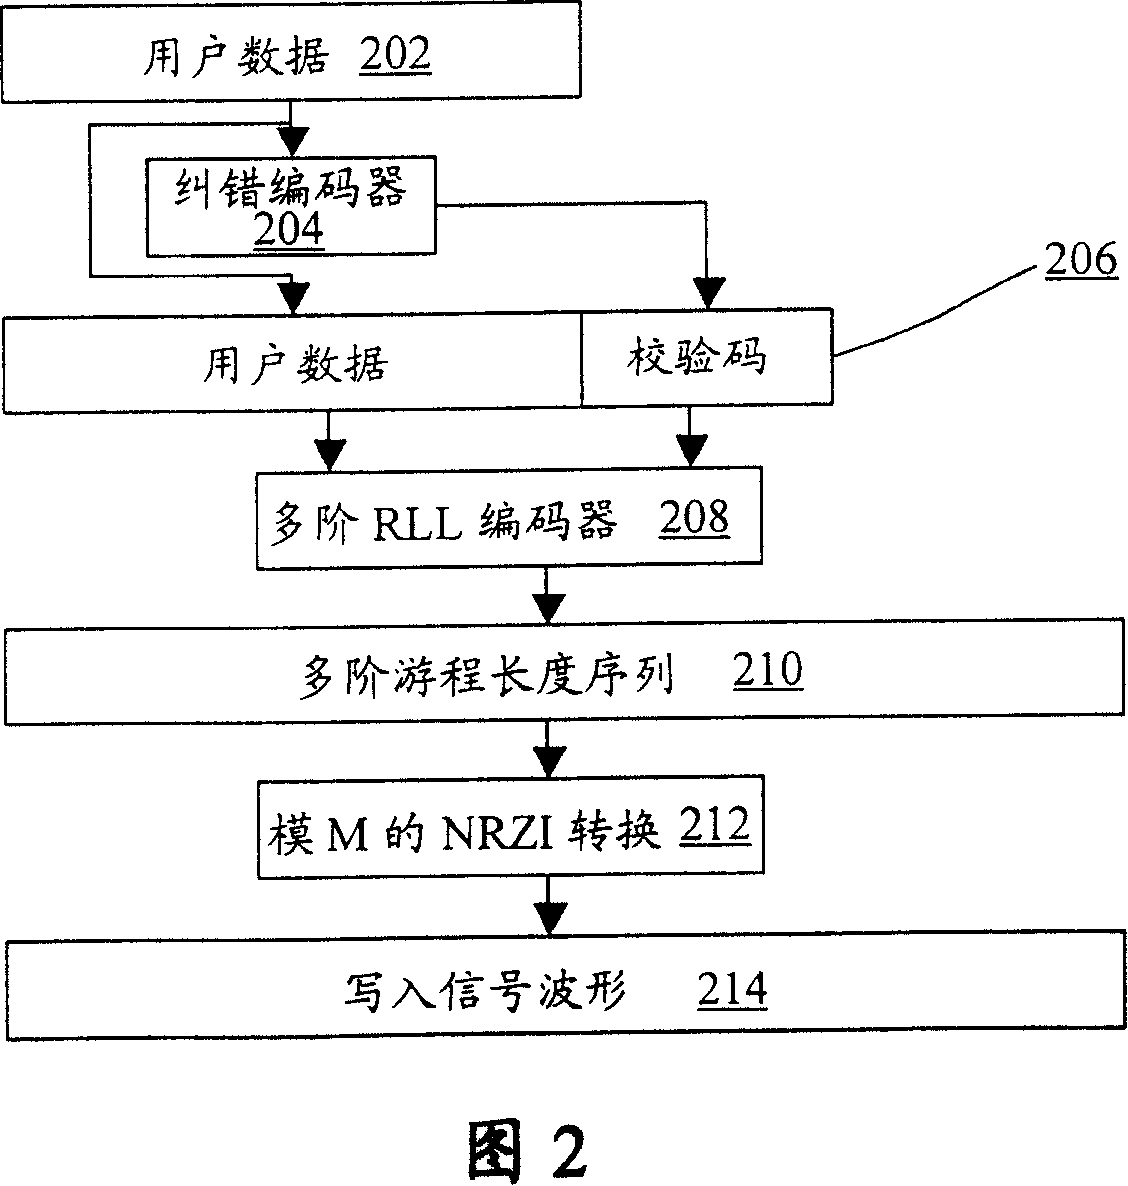 Multi-level read-only optical disc and method of production